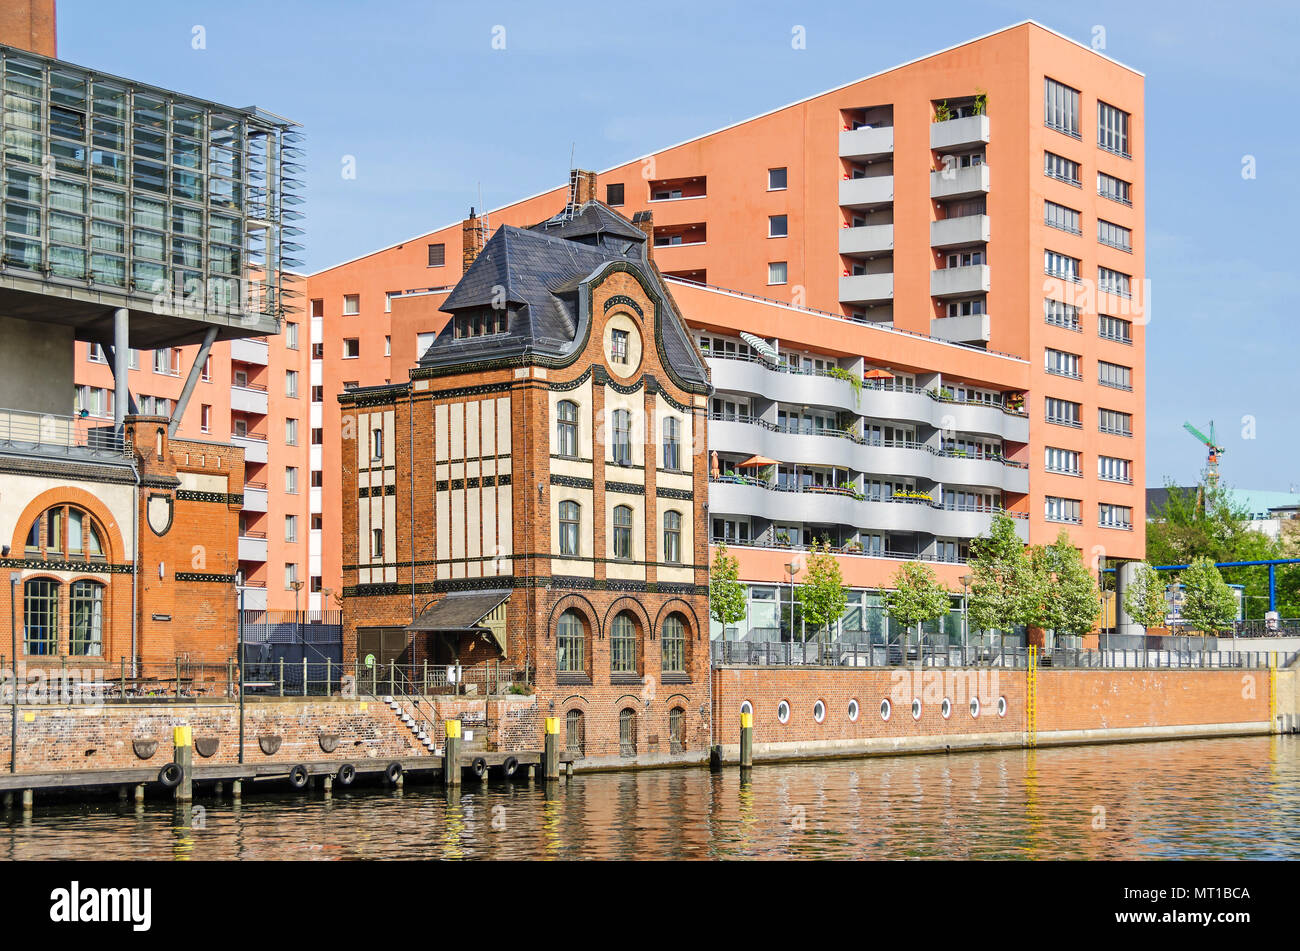 Berlin, Germany - April 22, 2018: Radialsystem V, a cultural and event center, with its red brick building of the machine hall of the pumping station Stock Photo